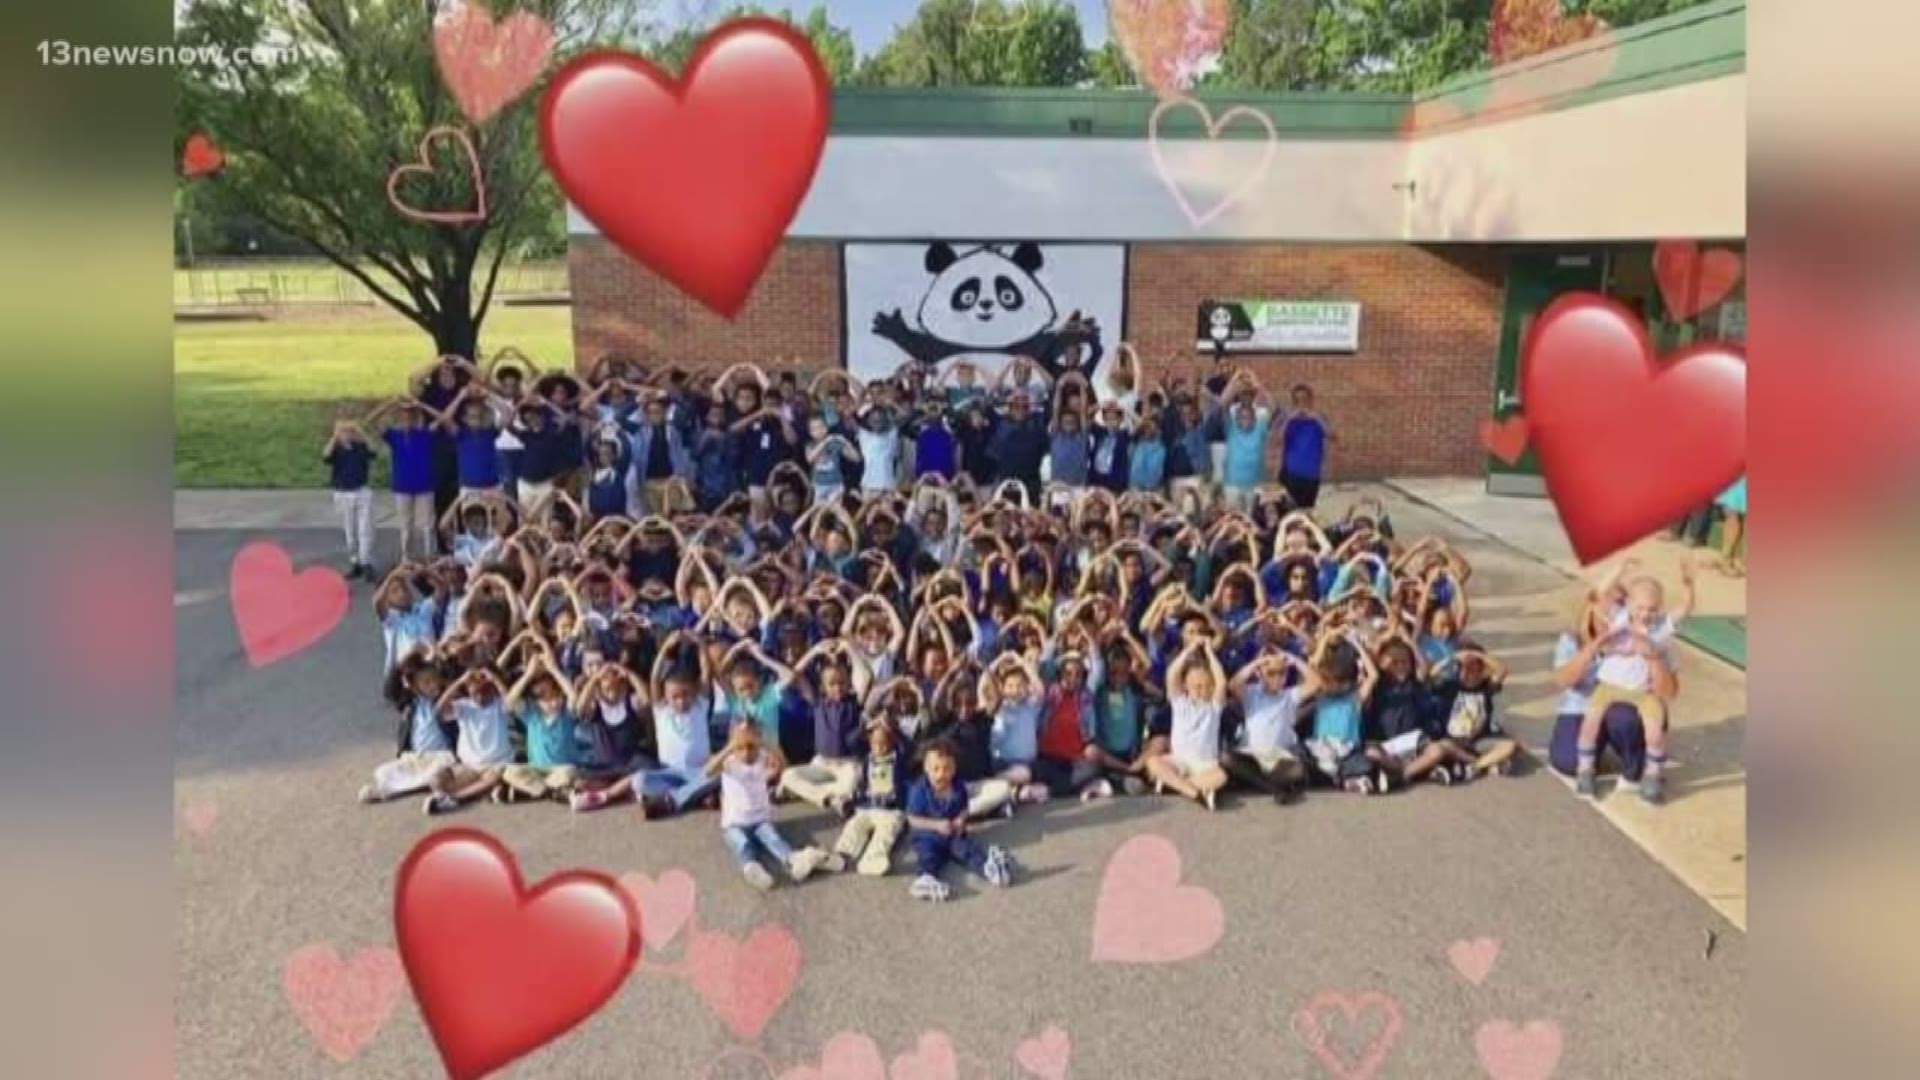 Virginia Beach City Public Schools asked students and staff to wear blue to show support and people across Hampton Roads joined in. CHKD Director of Mental Health said parents need to be ready to help their children cope and seek professional help if needed.